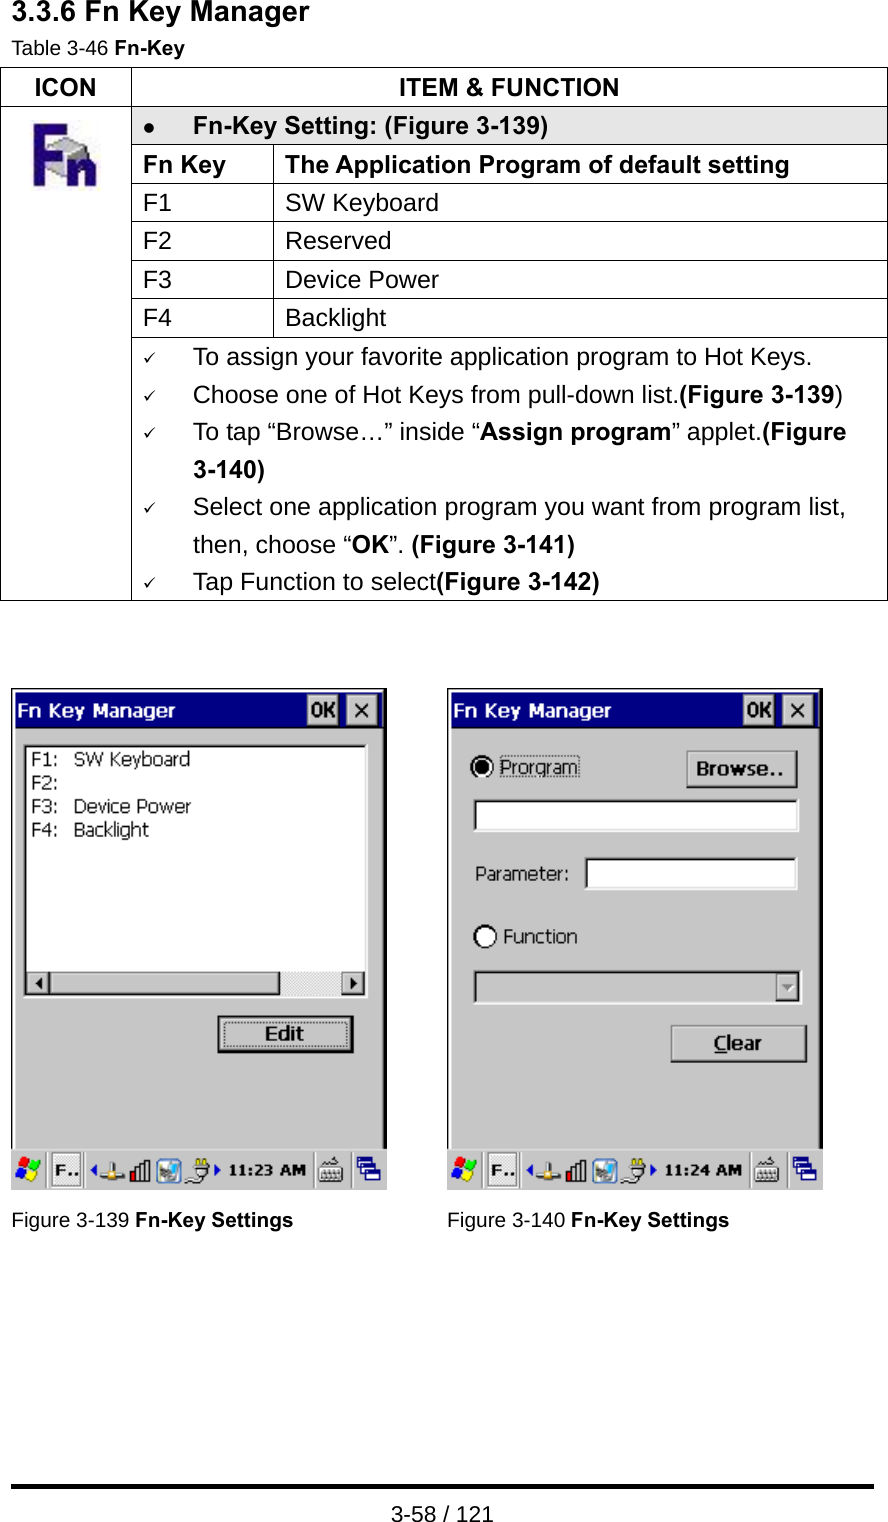  3-58 / 121 3.3.6 Fn Key Manager Table 3-46 Fn-Key ICON  ITEM &amp; FUNCTION z Fn-Key Setting: (Figure 3-139) Fn Key  The Application Program of default setting F1 SW Keyboard F2 Reserved F3 Device Power F4 Backlight  9 To assign your favorite application program to Hot Keys. 9 Choose one of Hot Keys from pull-down list.(Figure 3-139) 9 To tap “Browse…” inside “Assign program” applet.(Figure 3-140) 9 Select one application program you want from program list, then, choose “OK”. (Figure 3-141) 9 Tap Function to select(Figure 3-142)      Figure 3-139 Fn-Key Settings Figure 3-140 Fn-Key Settings   